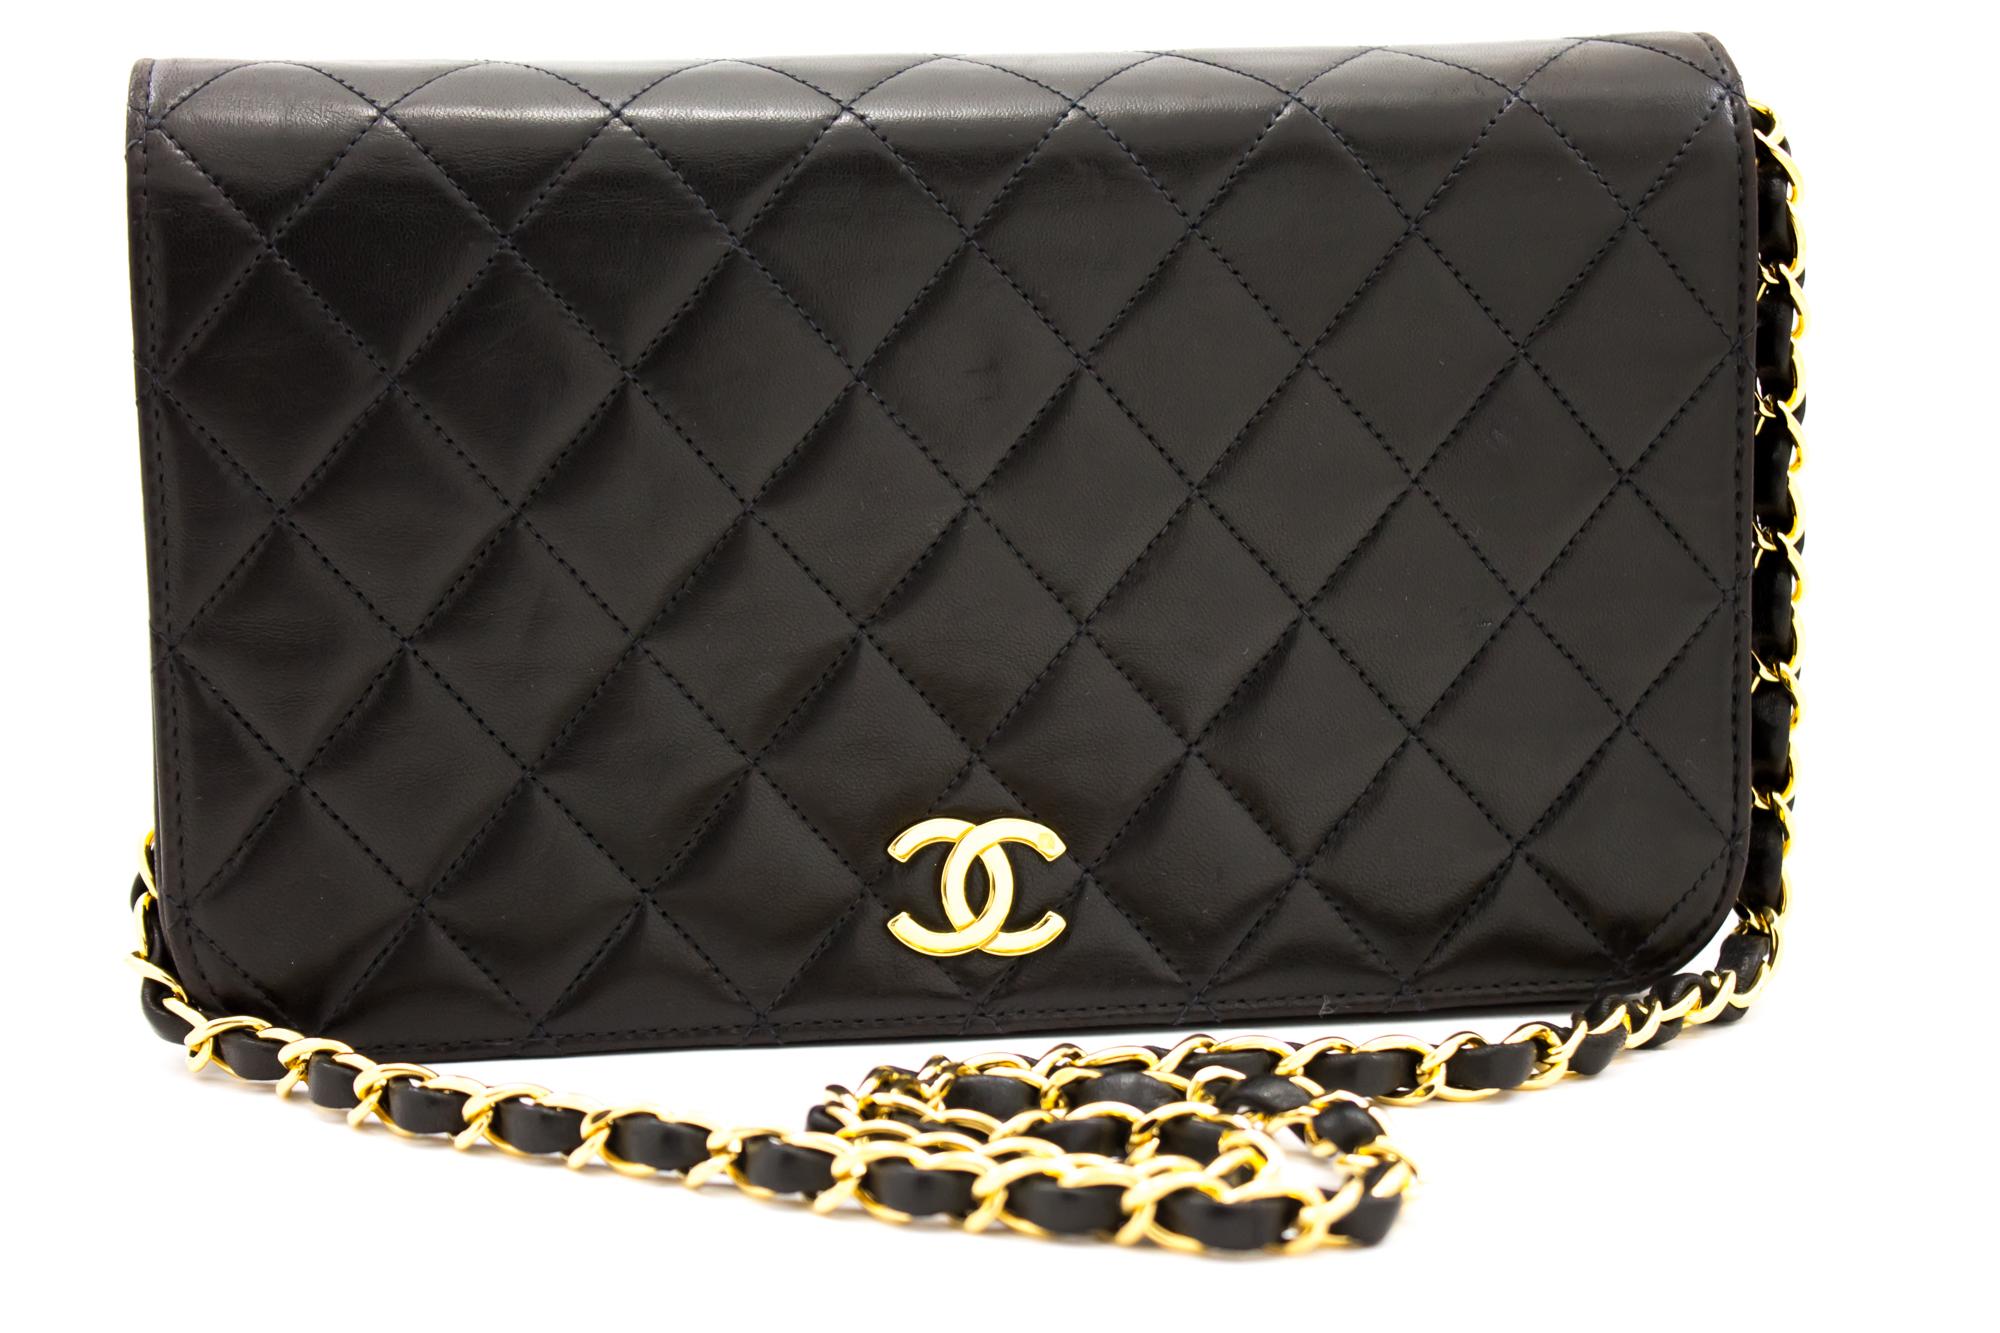 An authentic CHANEL Chain Shoulder Bag Clutch Black Quilted Flap made of black Lambskin. The color is Black. The outside material is Leather. The pattern is Solid. This item is Vintage / Classic. The year of manufacture would be